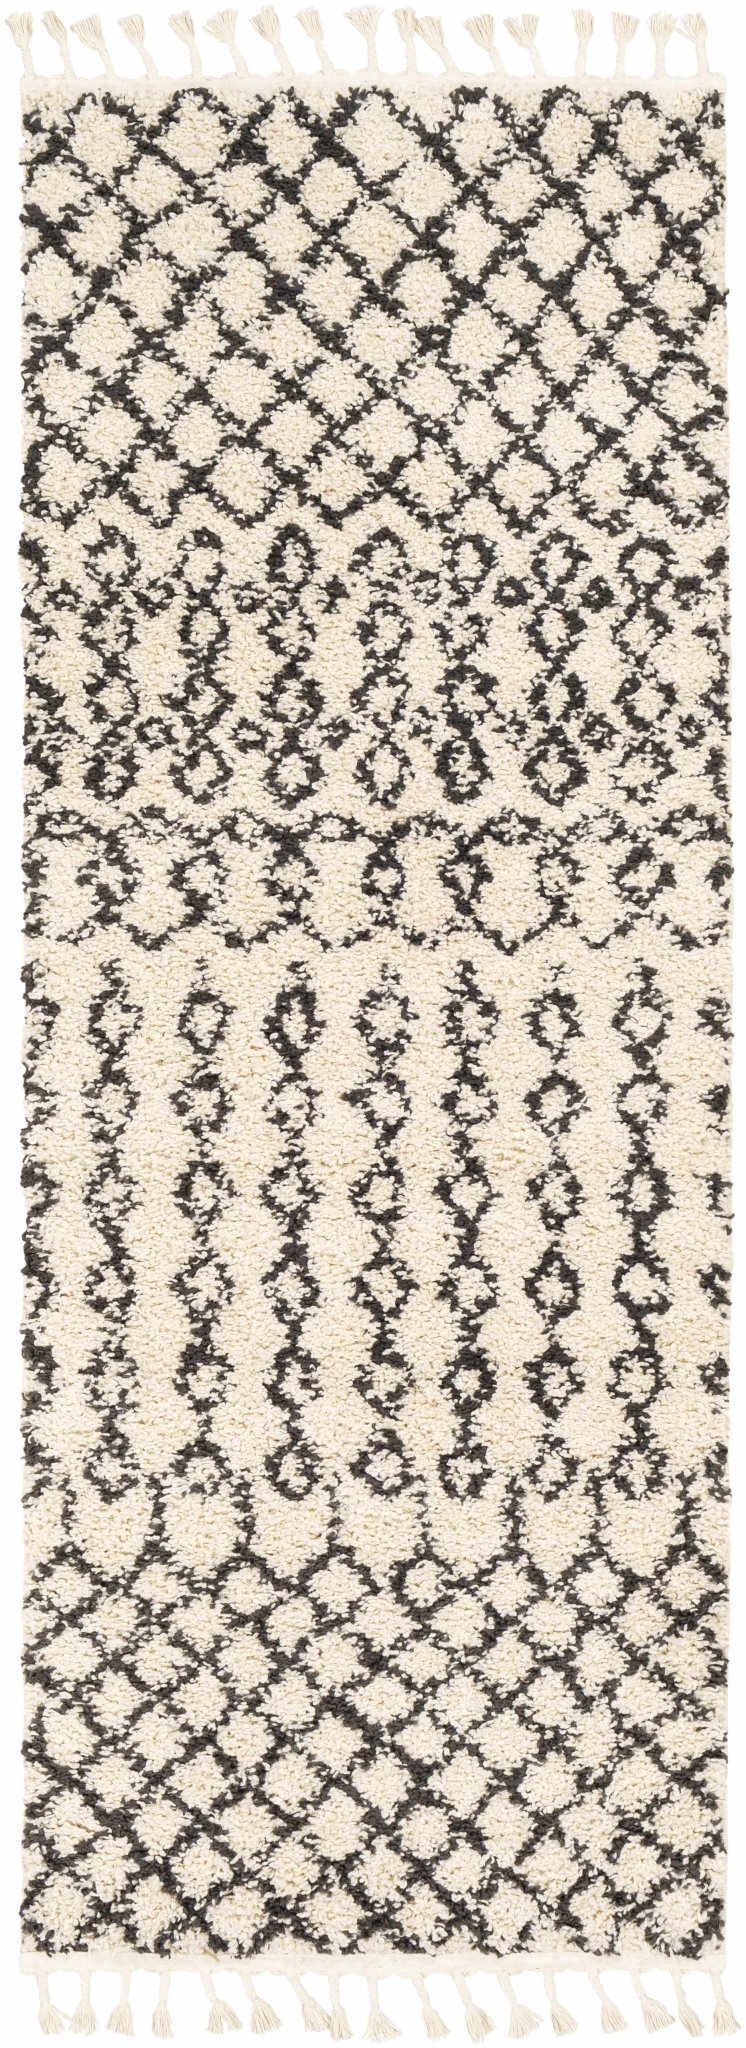 Traditional Moroccan Style Beige and Black Plush Pile Area Rug - The Rug Decor